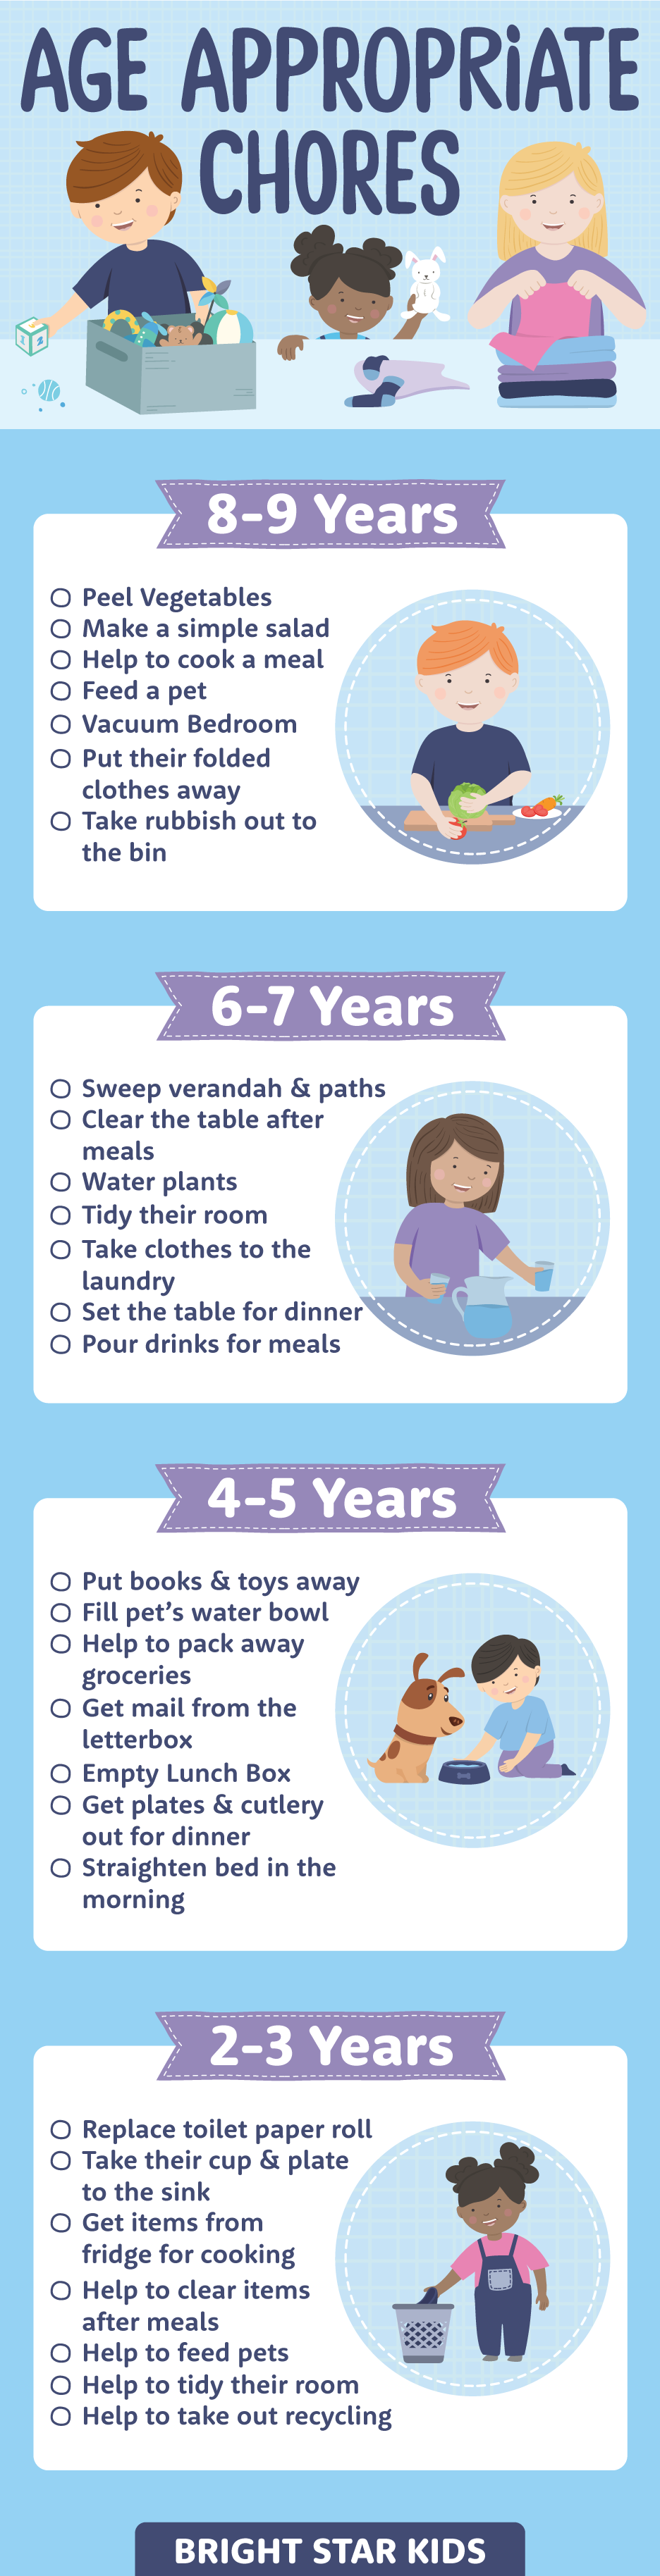 Chores for Kids By Age